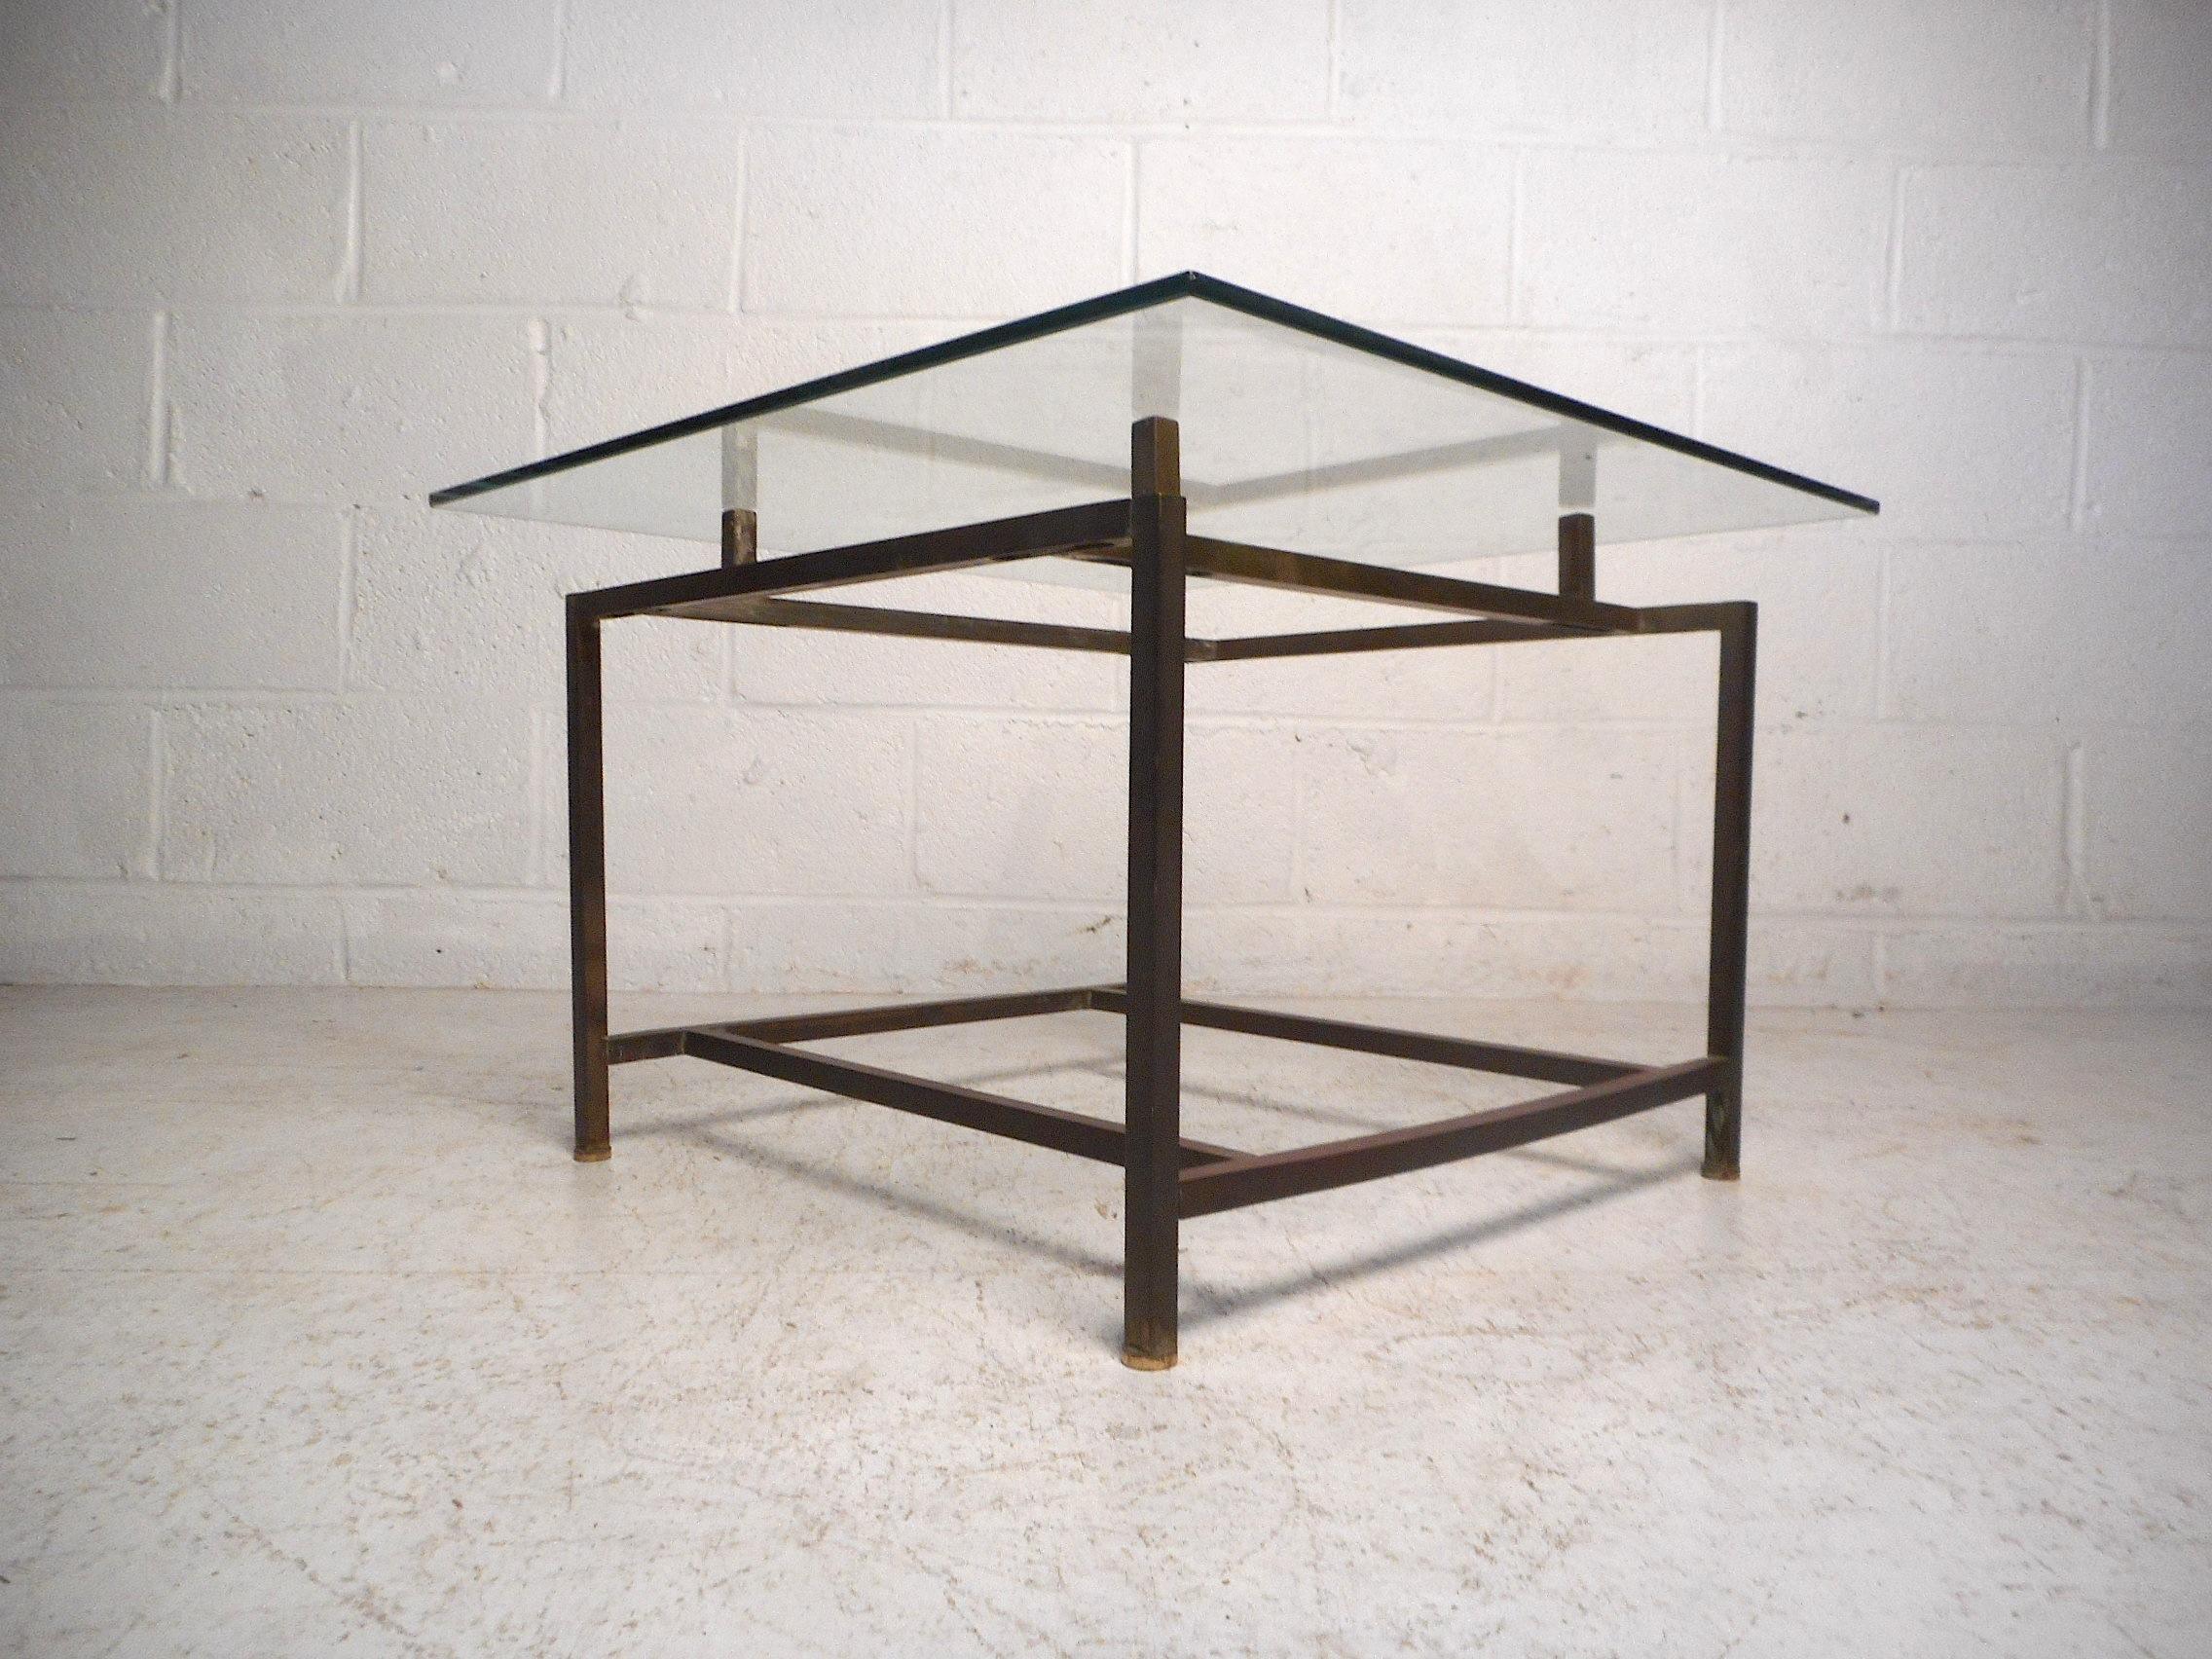 This unusual midcentury end table features a minimalist brass frame which supports a square piece of beveled glass which serves as the tabletop. An interesting and eye-catching addition to any modern interior. Please confirm item location with